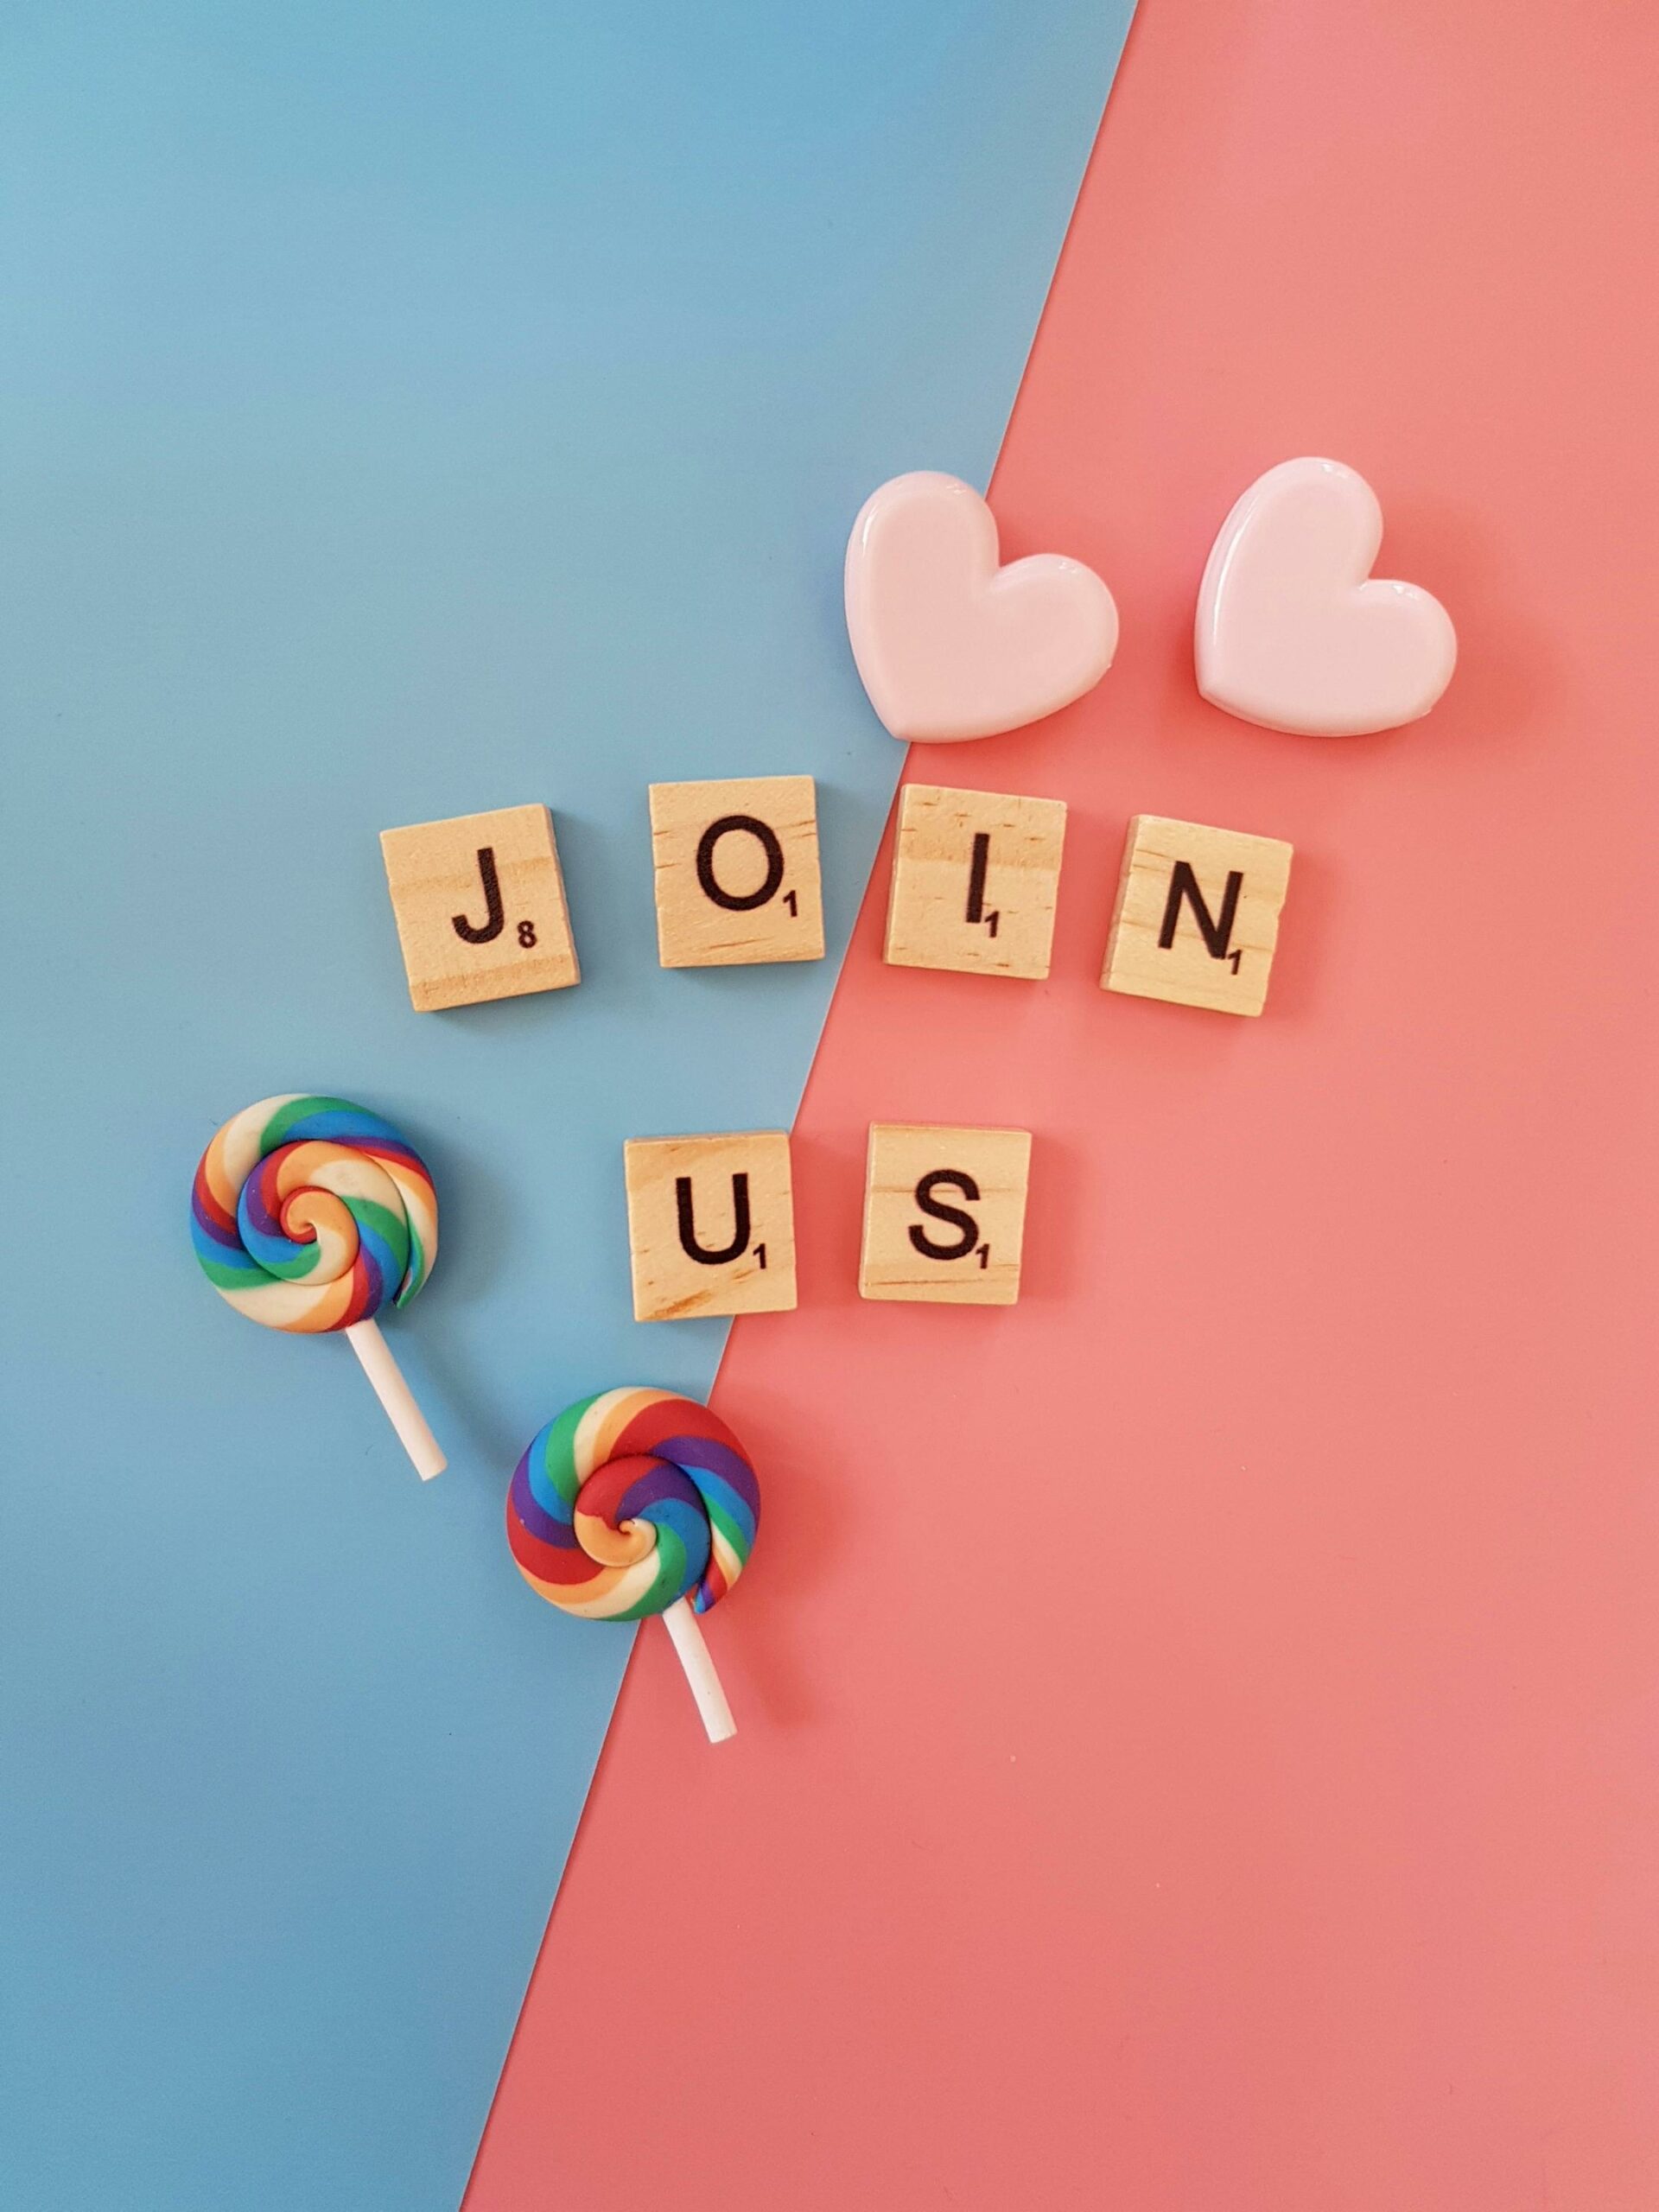 join us written in wooden letters on a blue and pink back ground and with two lollipops next to the words